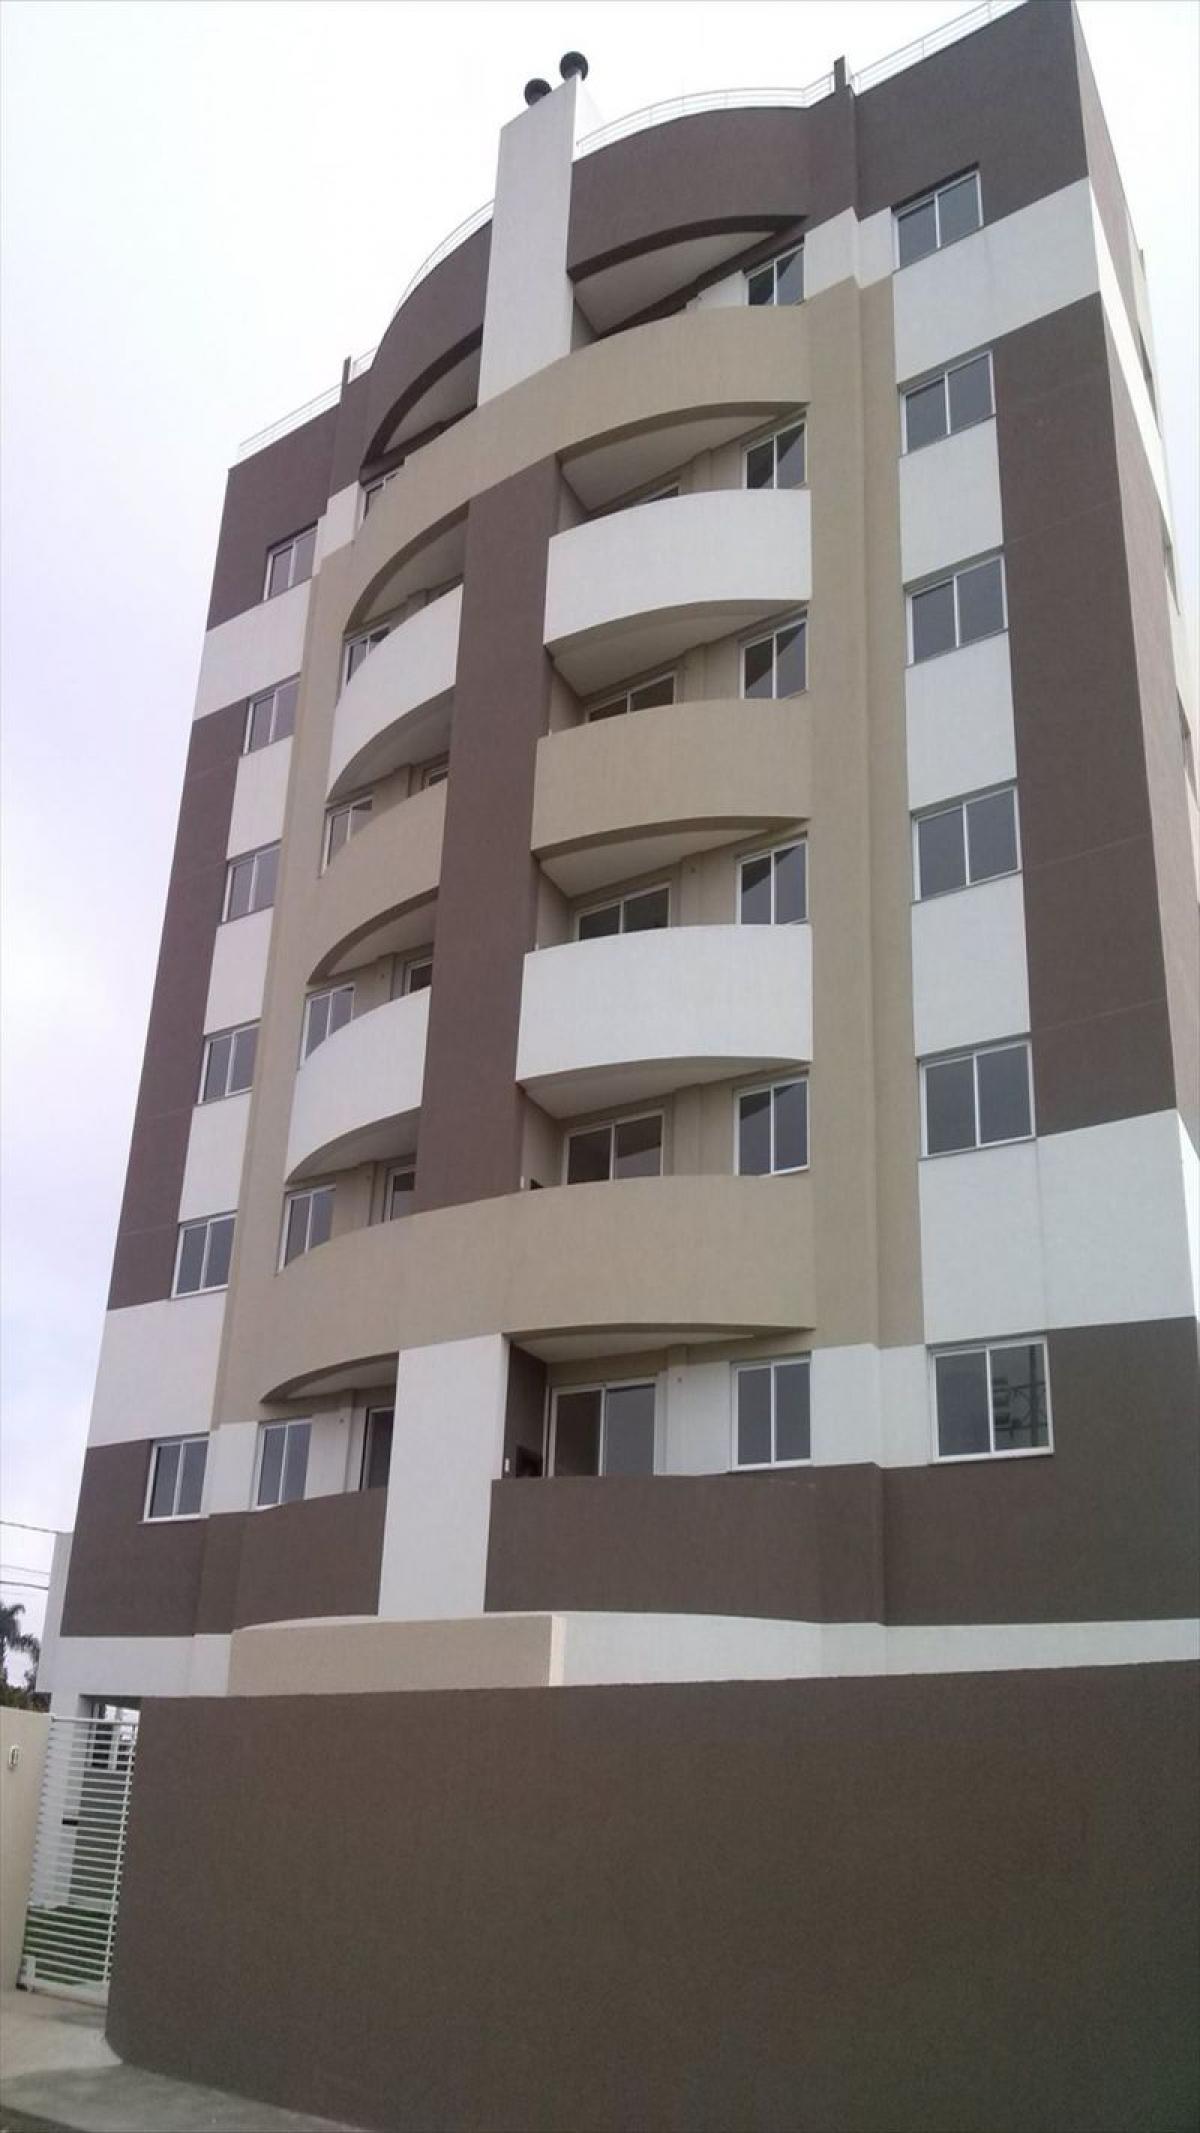 Picture of Apartment For Sale in Pinhais, Parana, Brazil